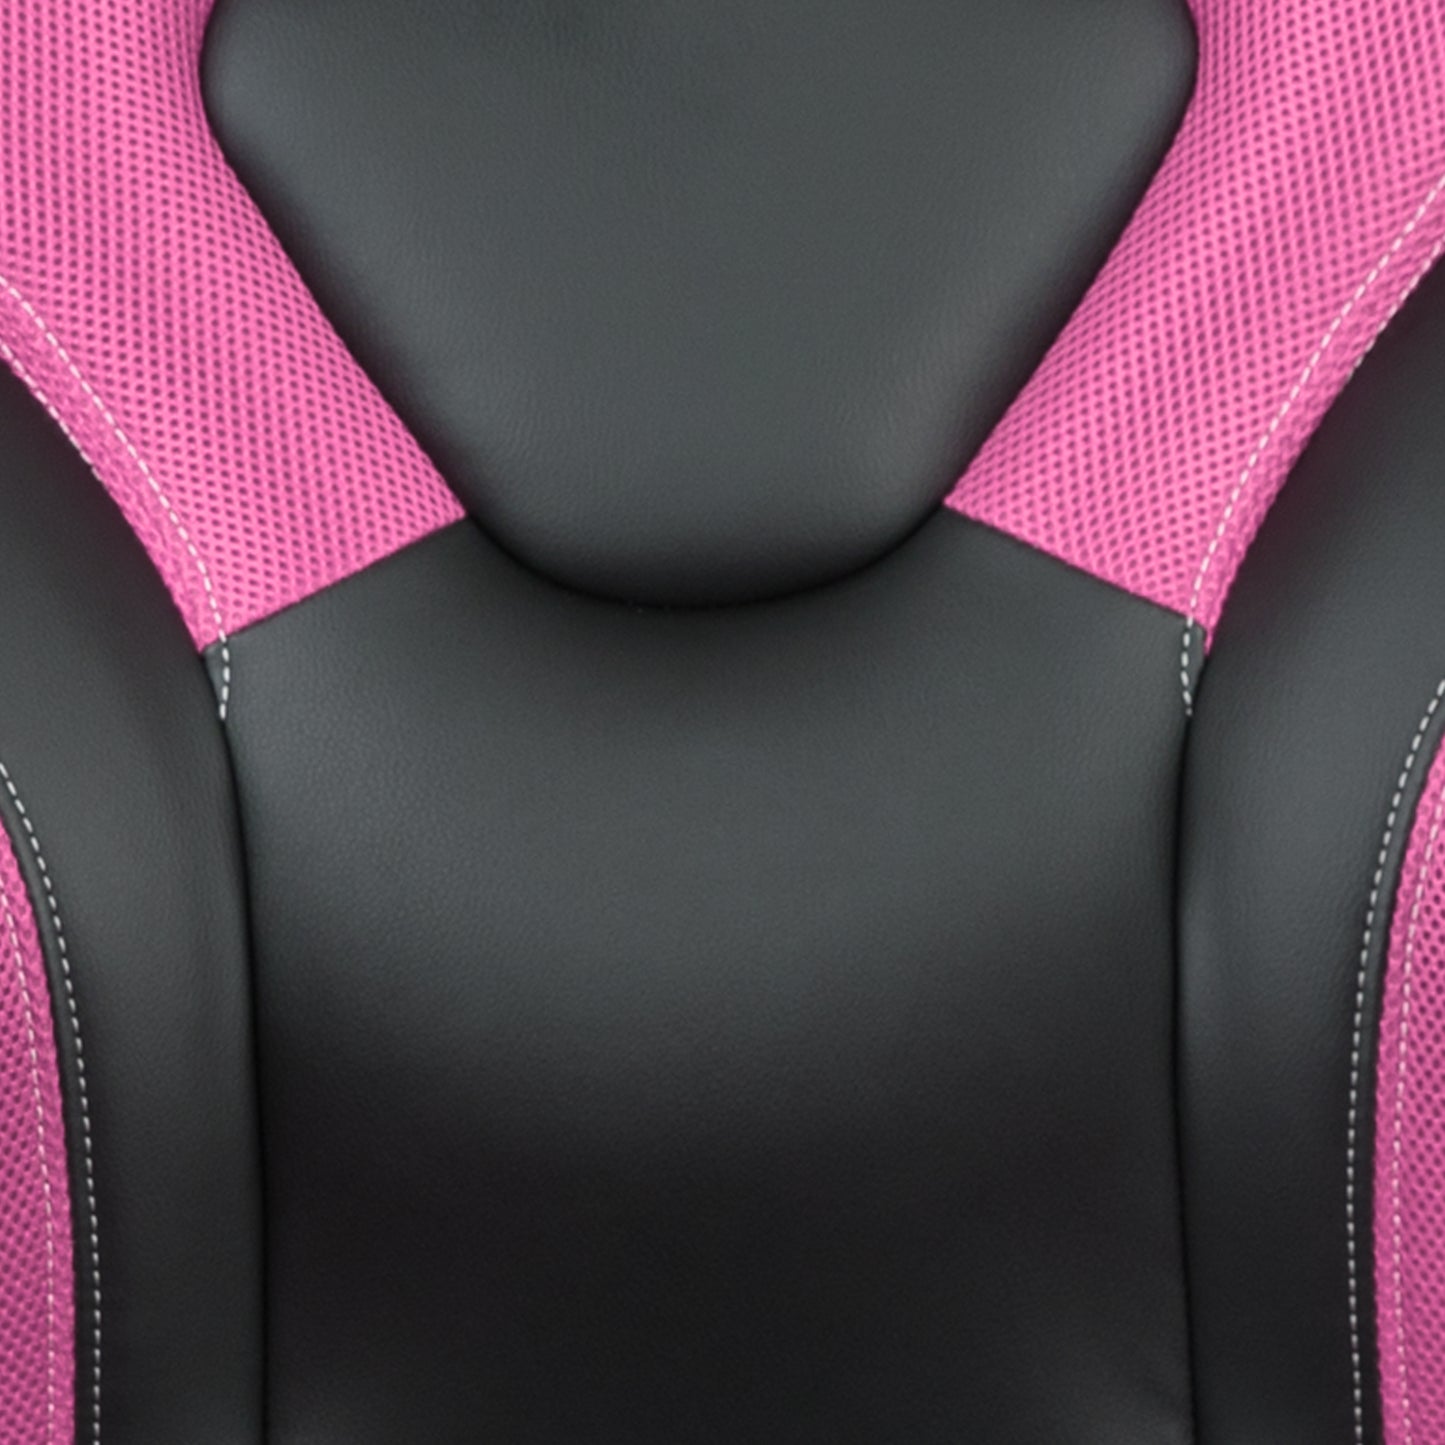 Optis Gaming Desk with Pink Chair